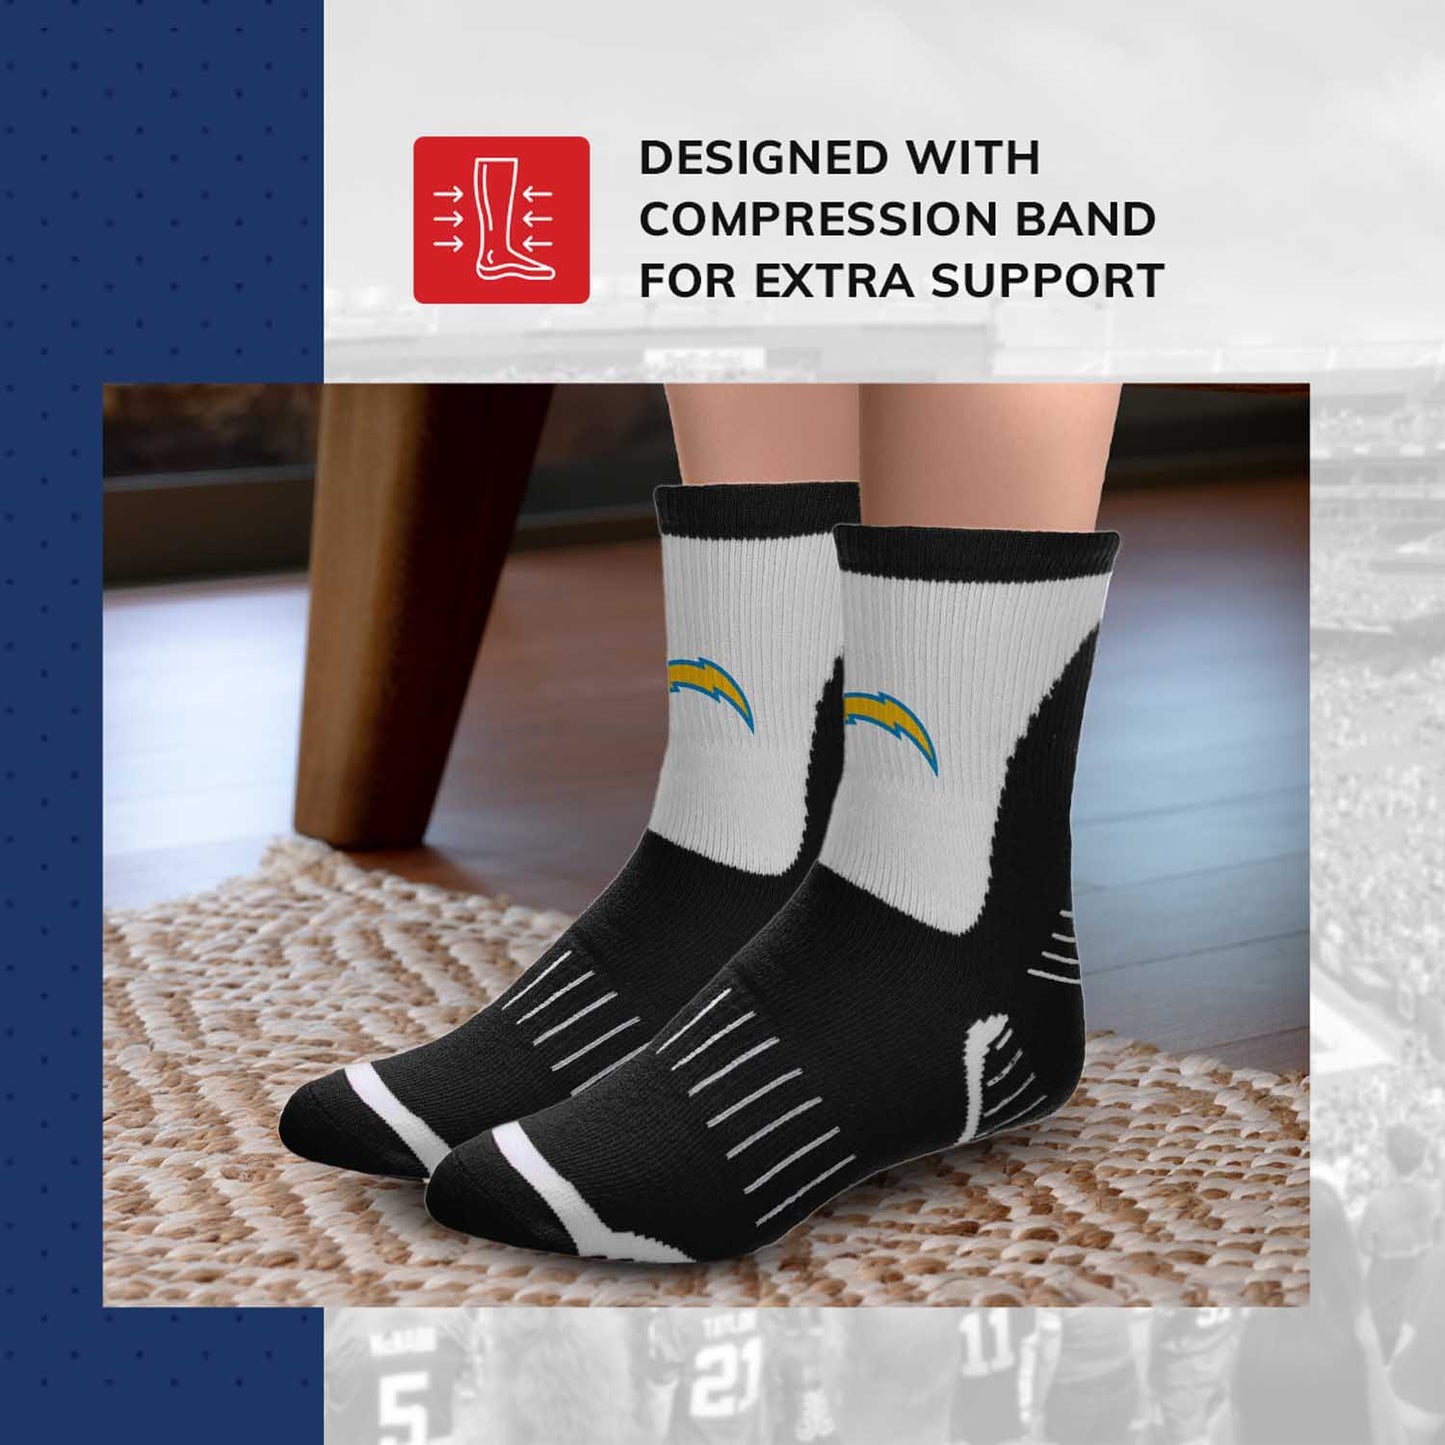 Los Angeles Chargers NFL Youth Performance Quarter Length Socks - Black